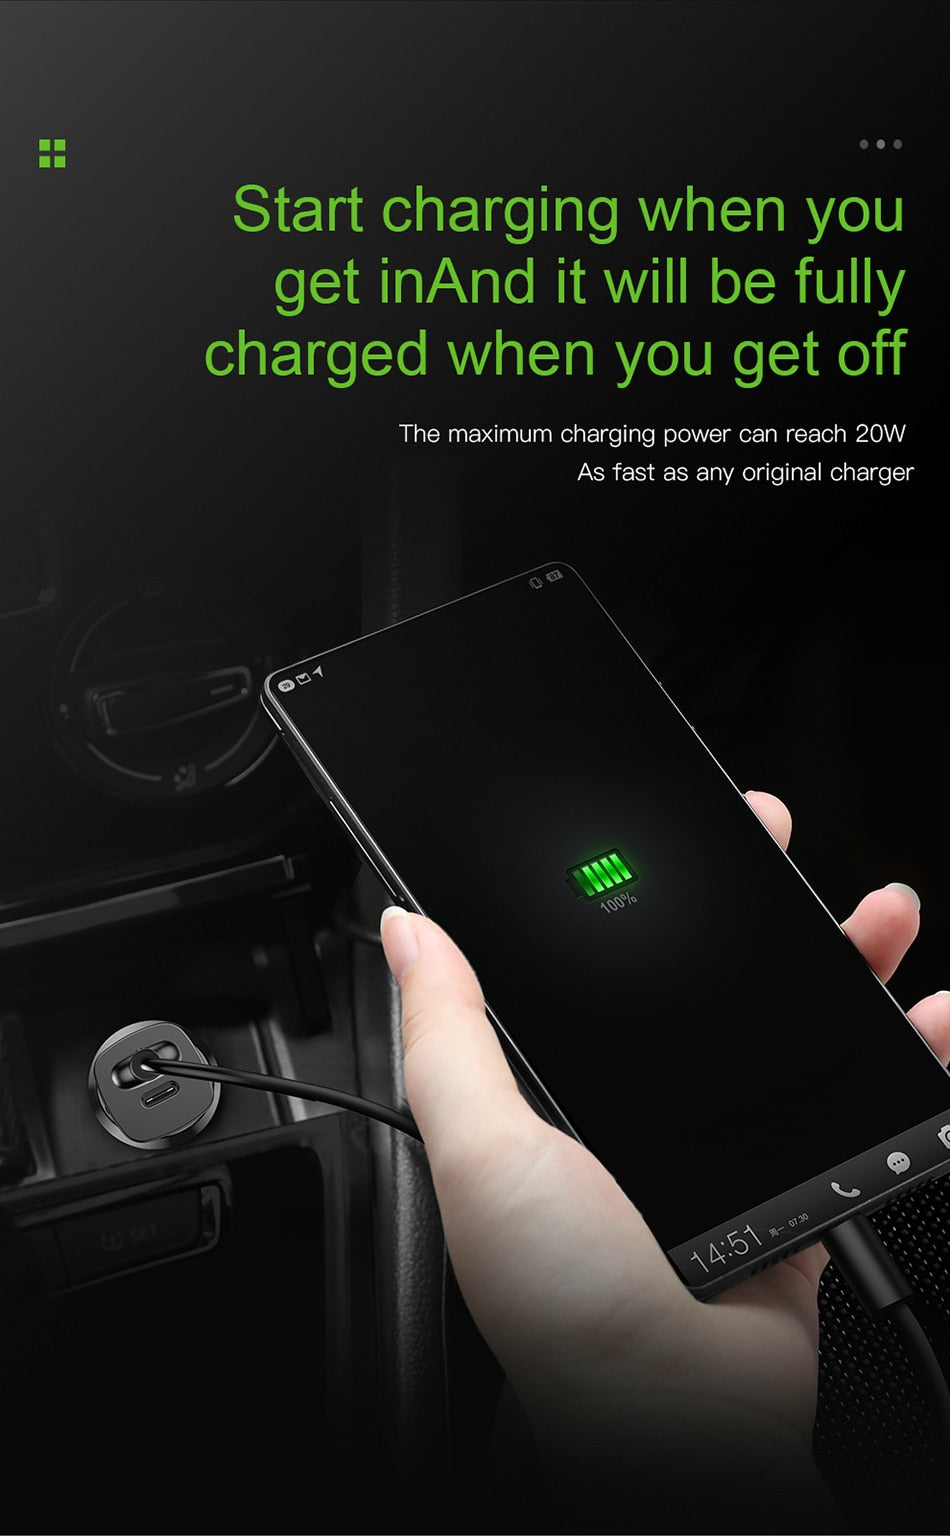 Baseus Quick Charge 4.0 30W Dual USB PD Type C Fast Charging Car Phone Charger For iPhone Samsung Xiaomi